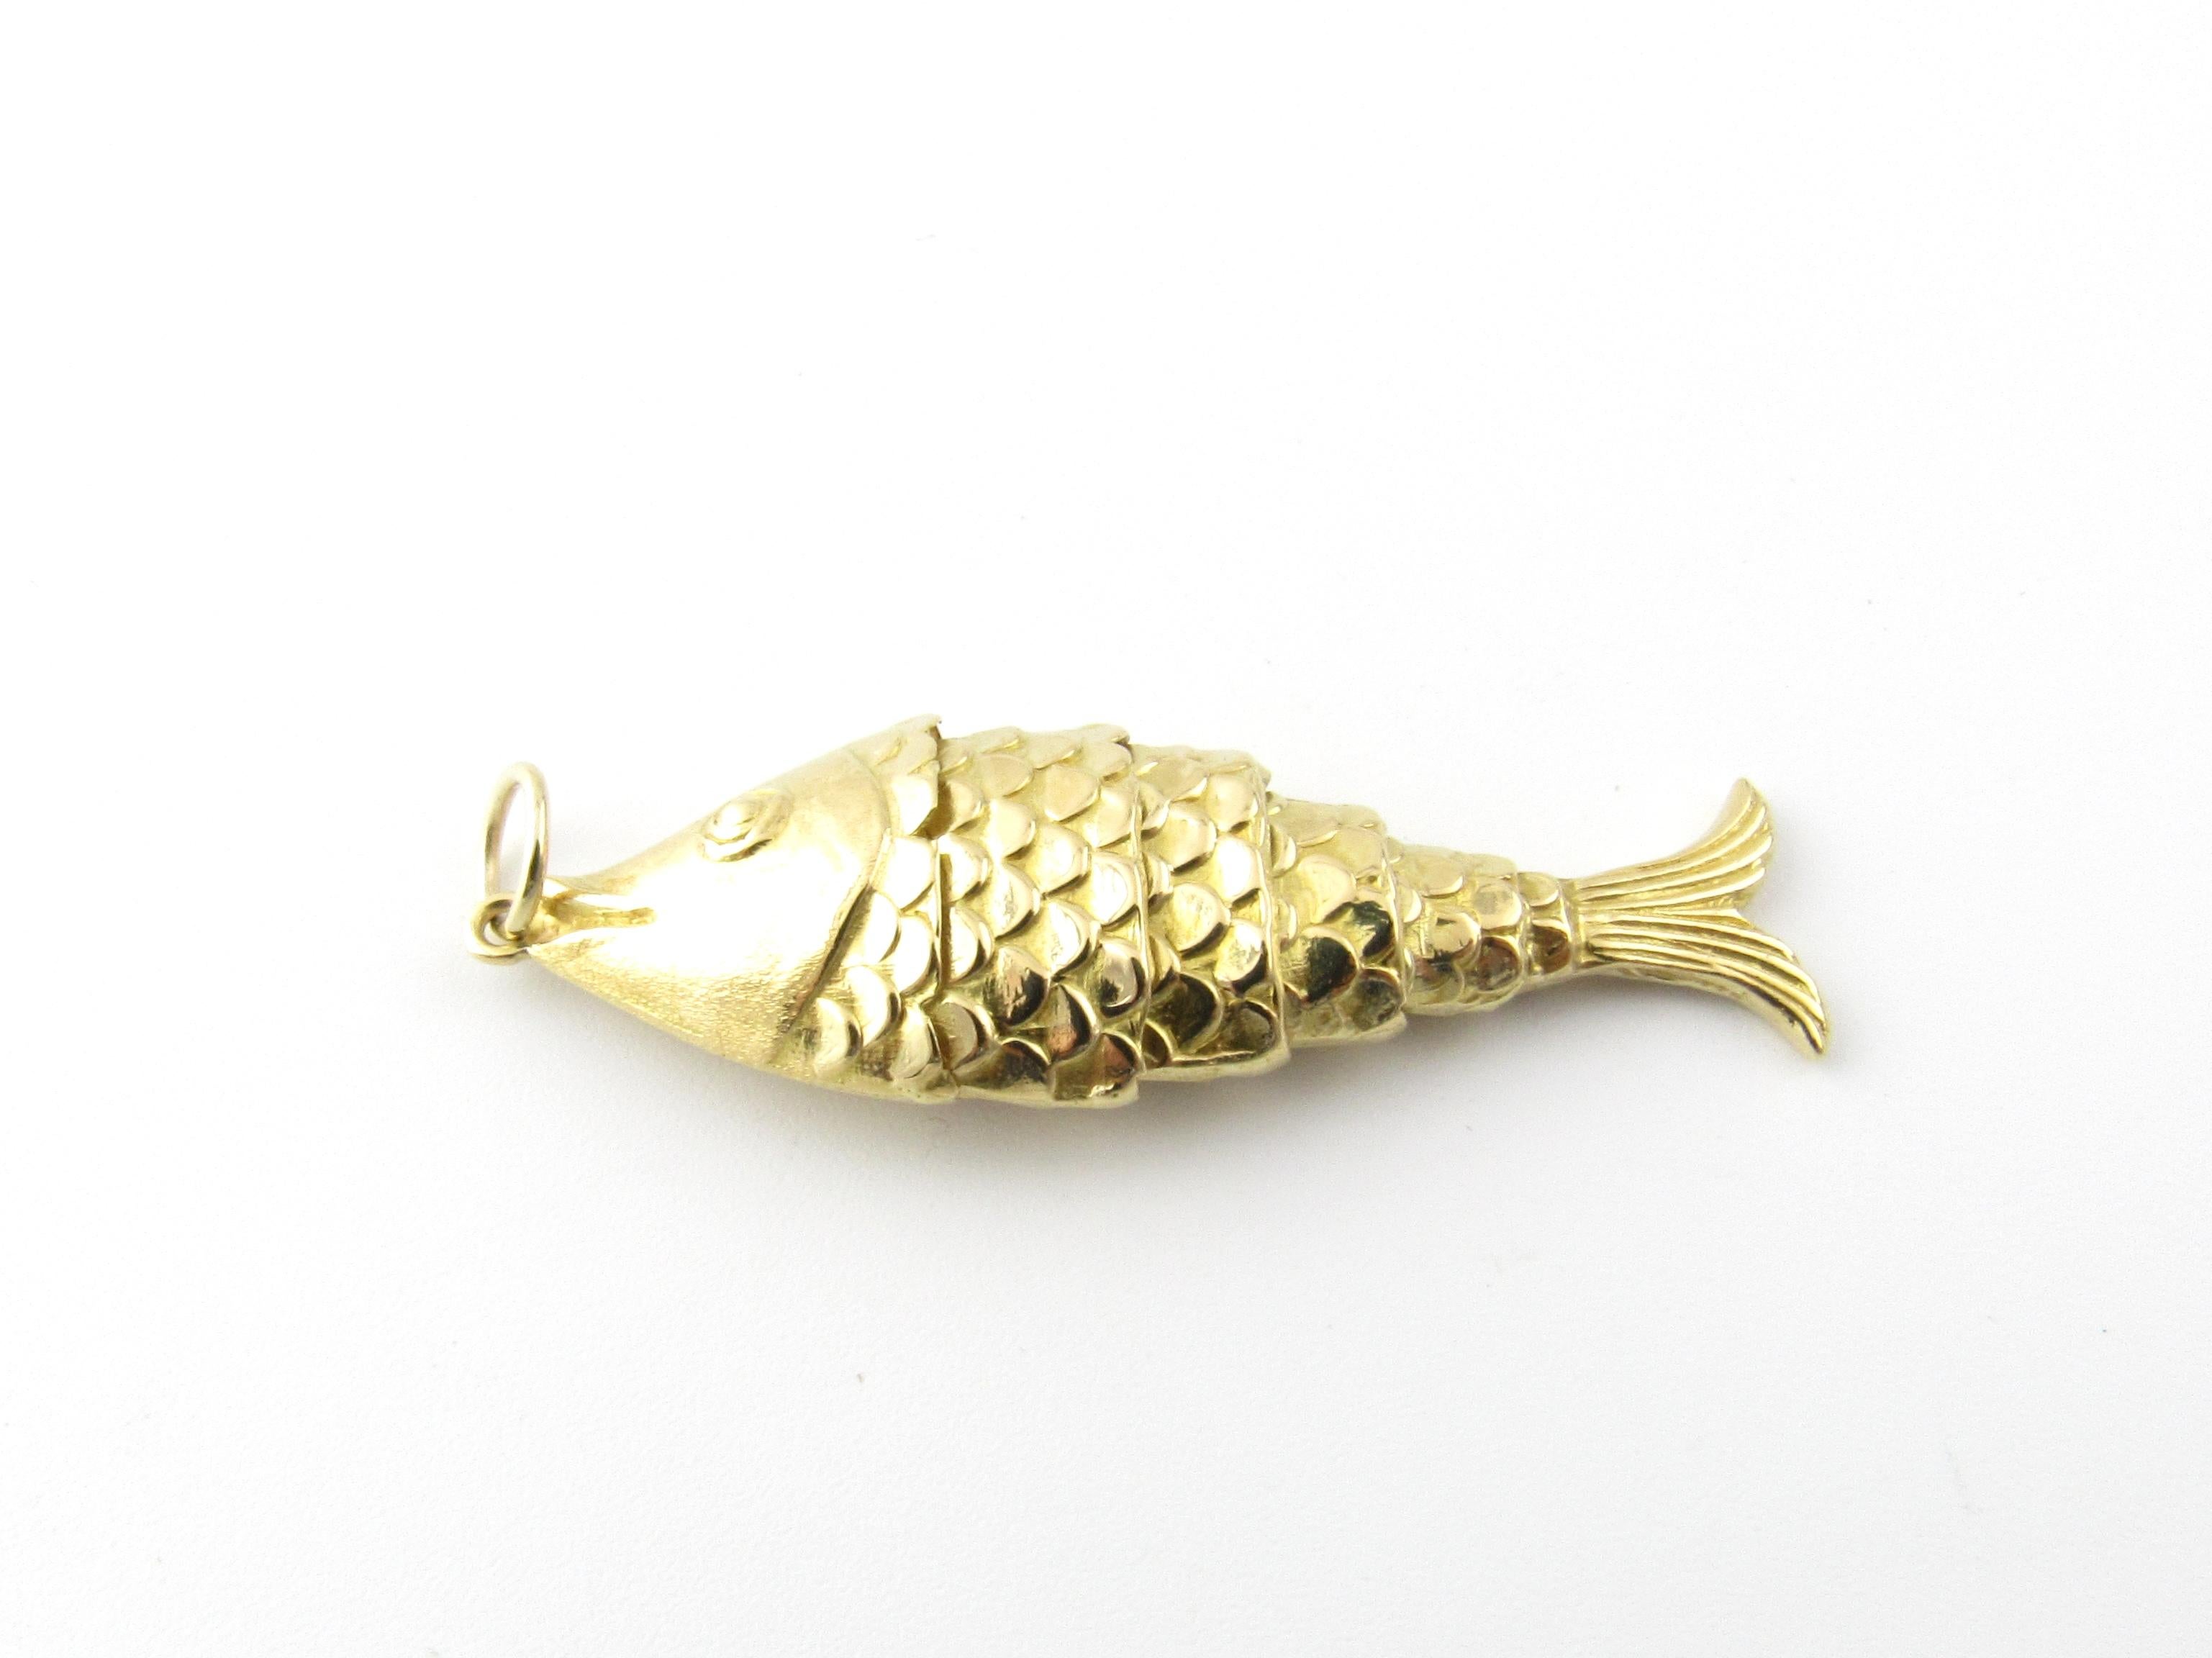 Vintage 14 Karat Yellow Gold Articulated Fish Pendant

This lovely 3D articulated pendant features a wriggling fish meticulously detailed in 14K yellow gold.

Size: 42 mm x 14 mm

Weight: 2.0 dwt. / 3.2 gr.

Acid tested for 14K gold.

Very good